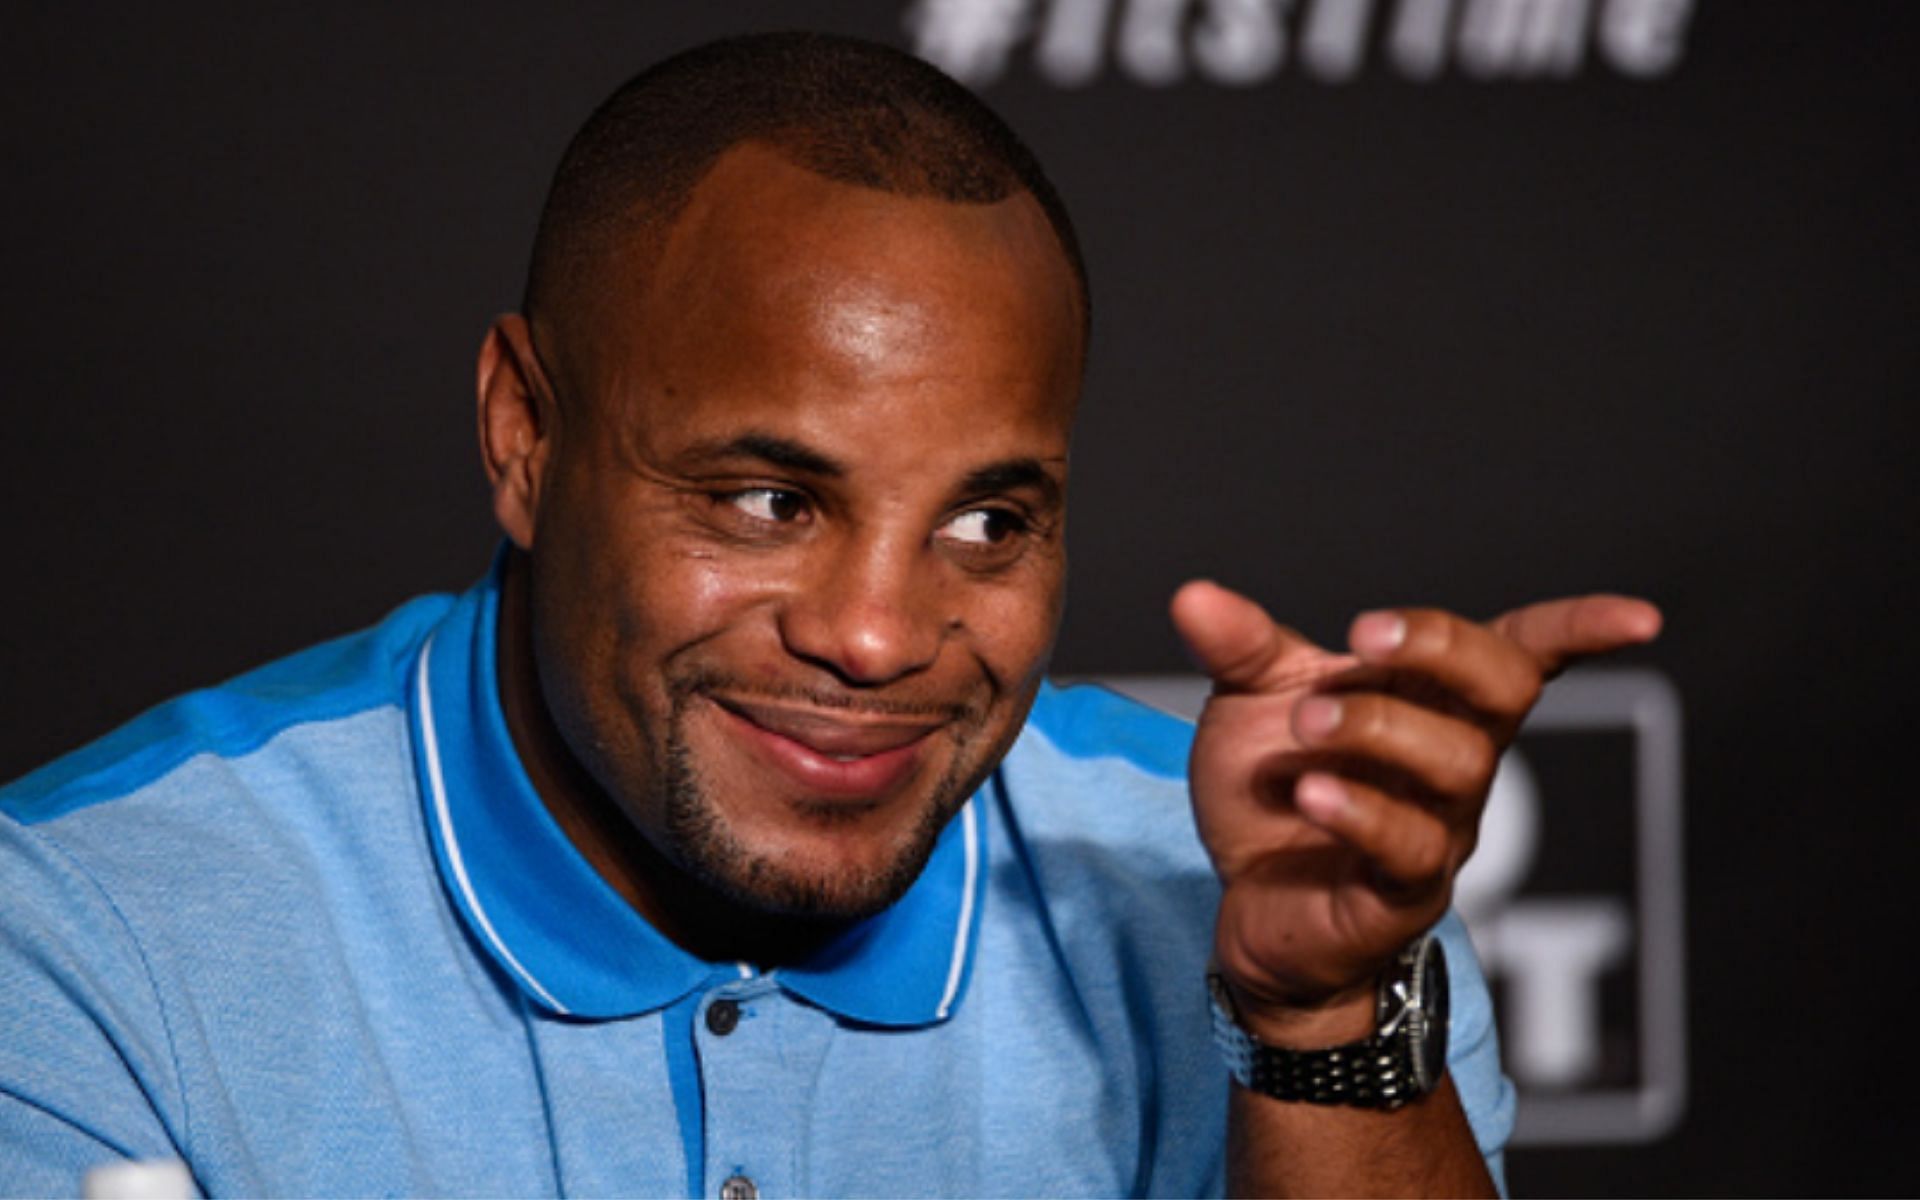 Daniel Cormier works as a UFC commentator and MMA analyst